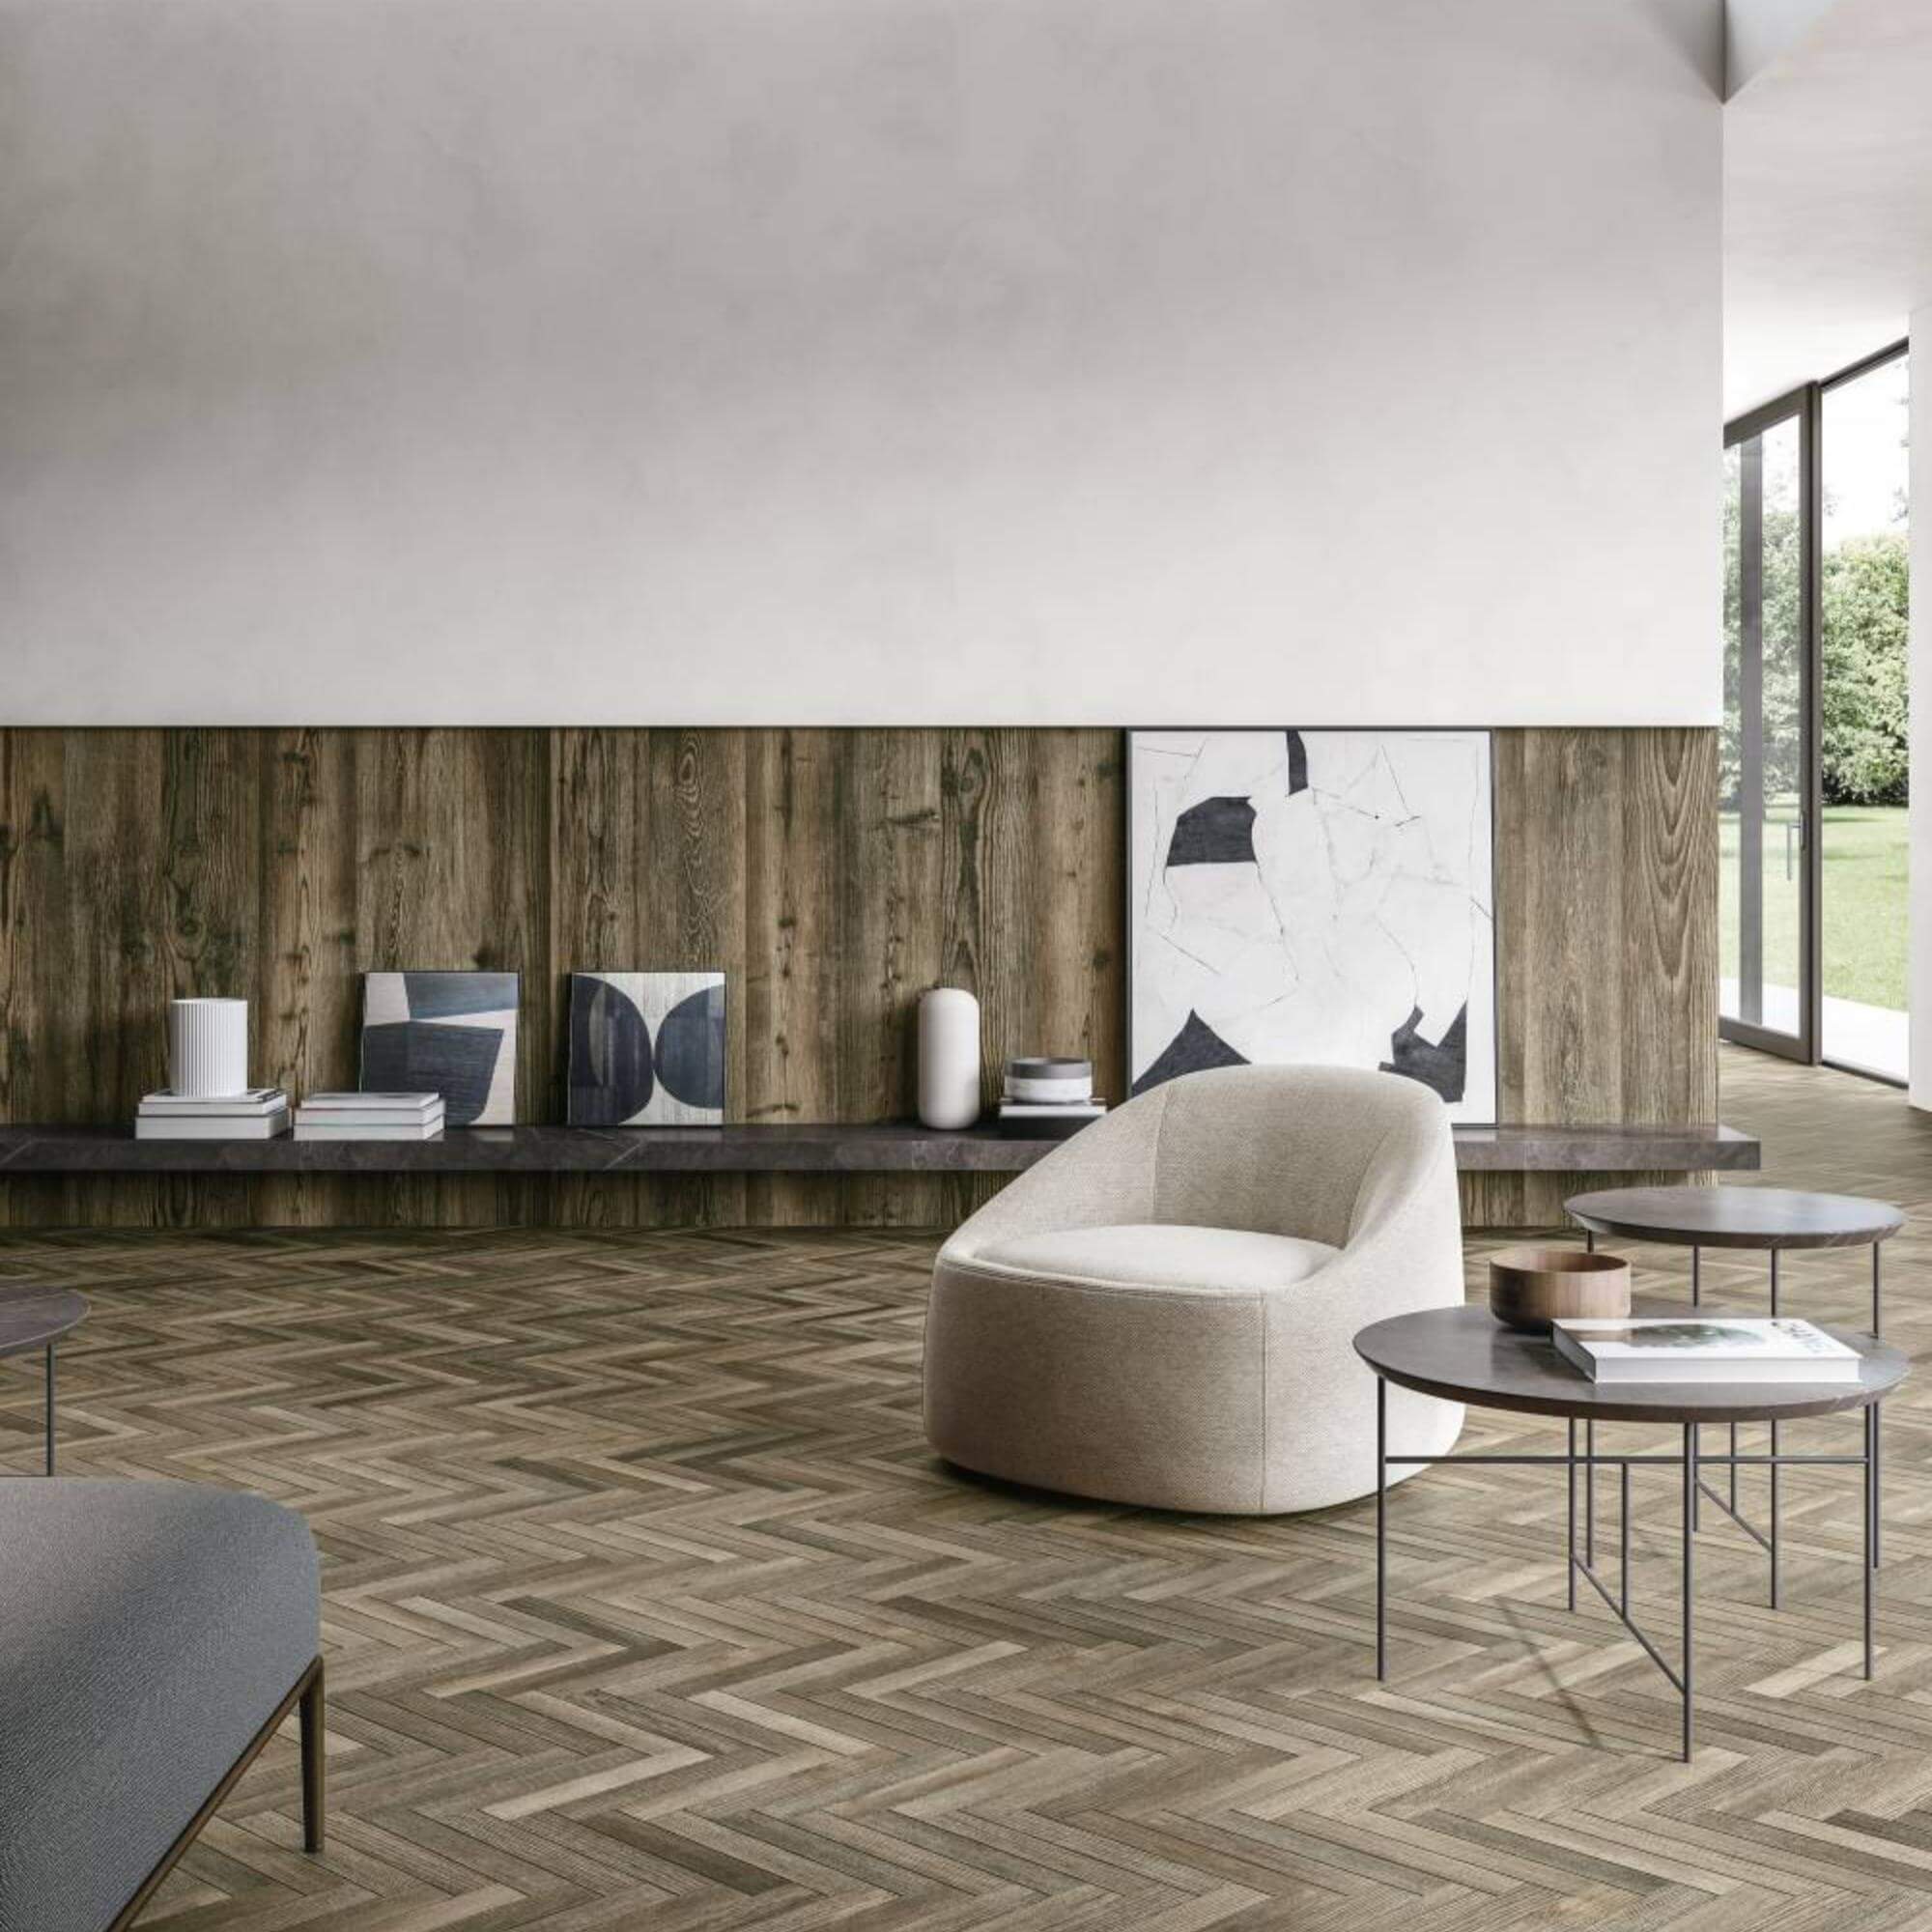 Cortina tobacco tiles in living room setting